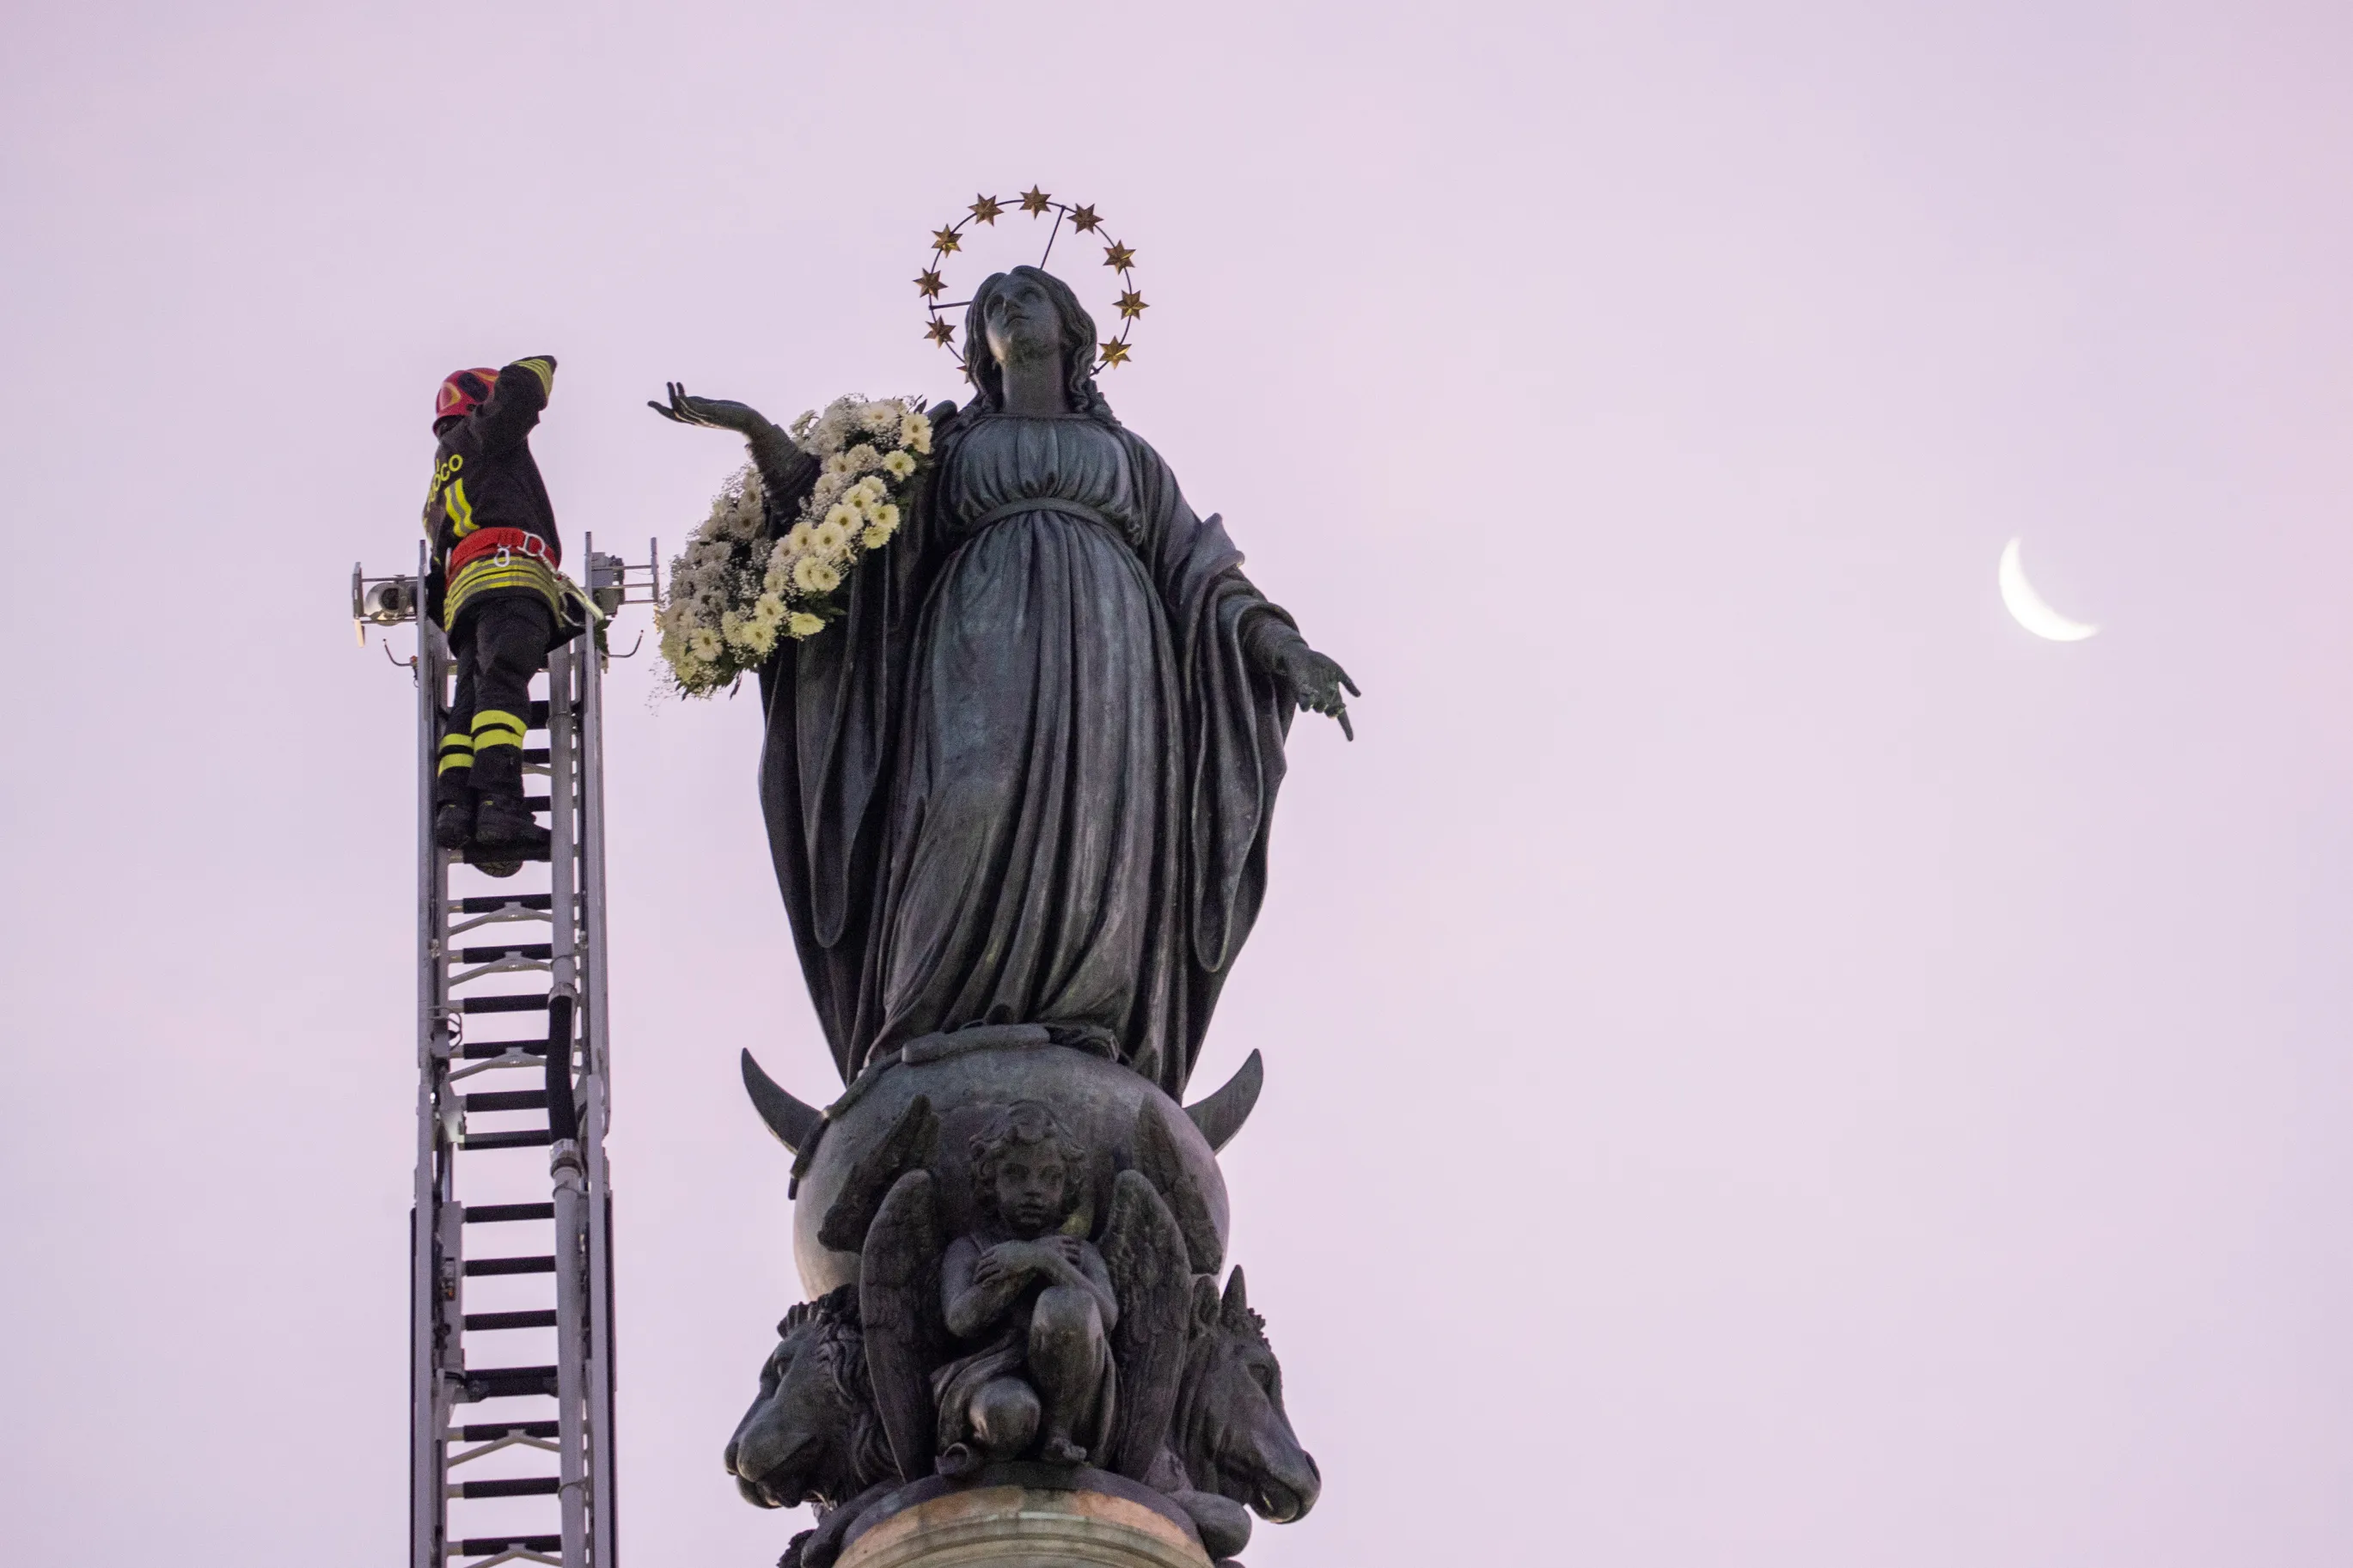 A firefighter scales a long ladder to the top of a nearly 40-foot-high column to pay tribute at dawn to the Blessed Virgin with a wreath of flowers on Dec. 8, 2023.?w=200&h=150